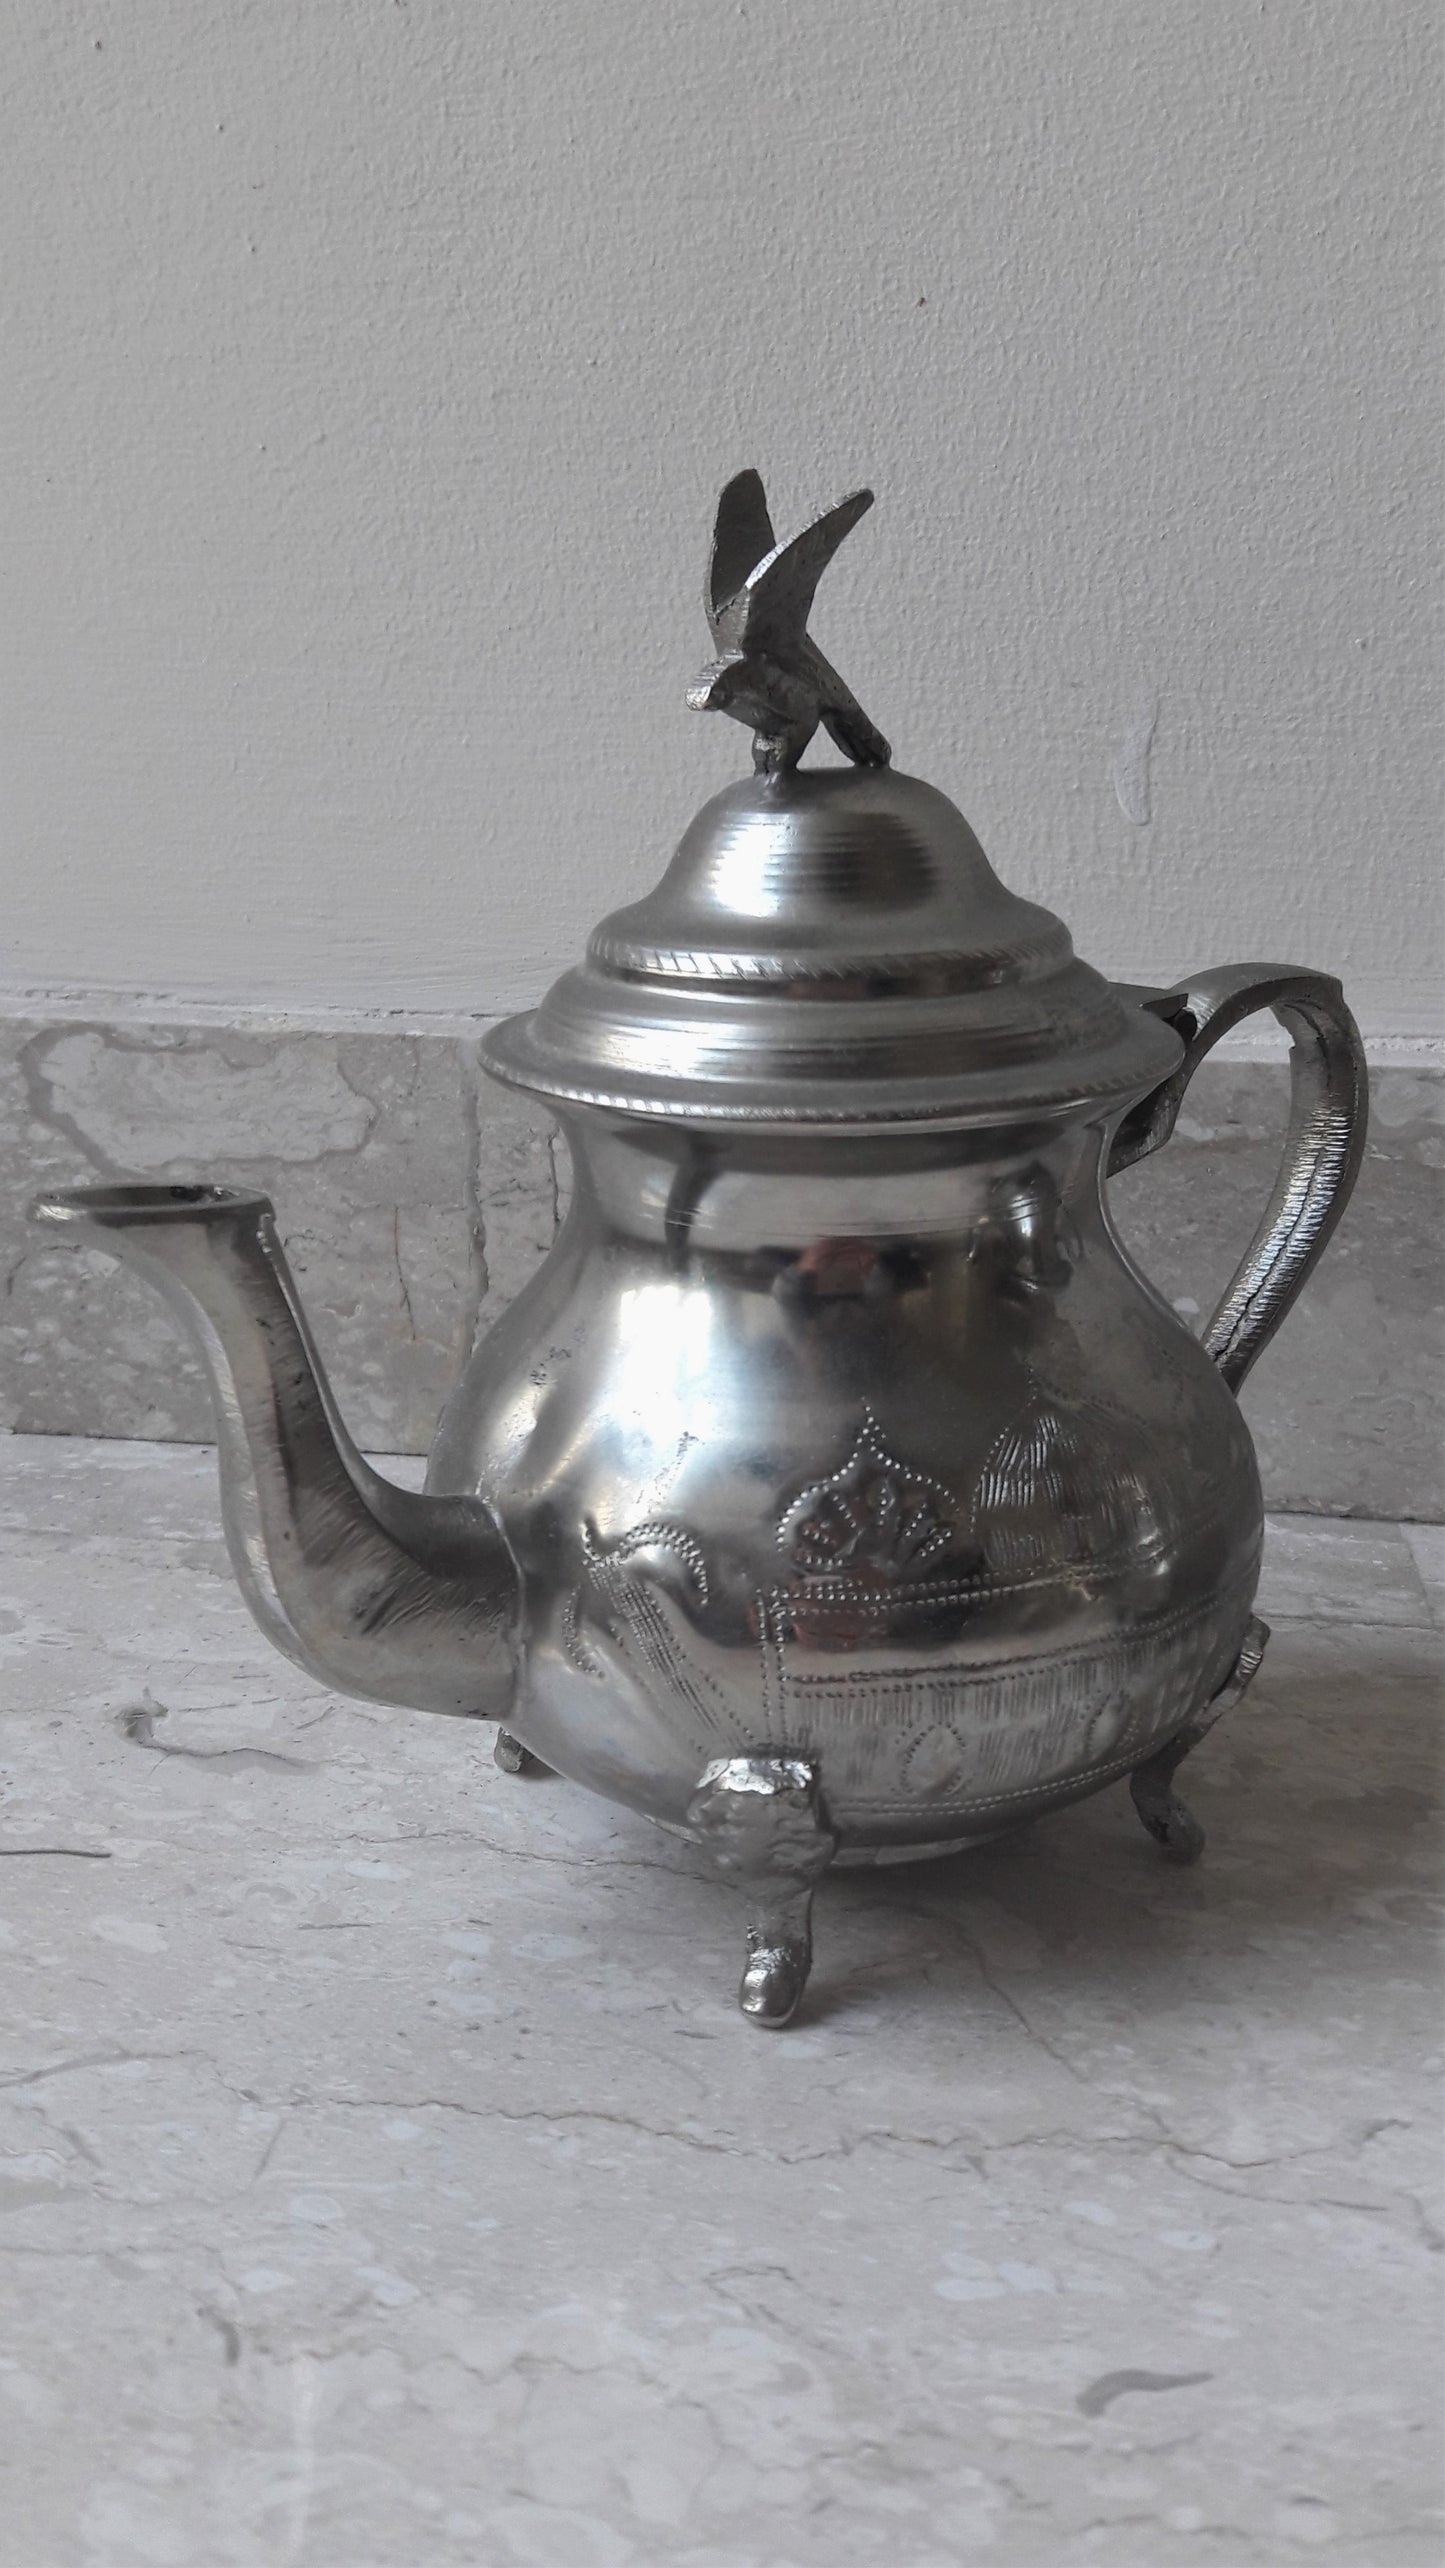 Vintage Pair of Silver Plated Teapots